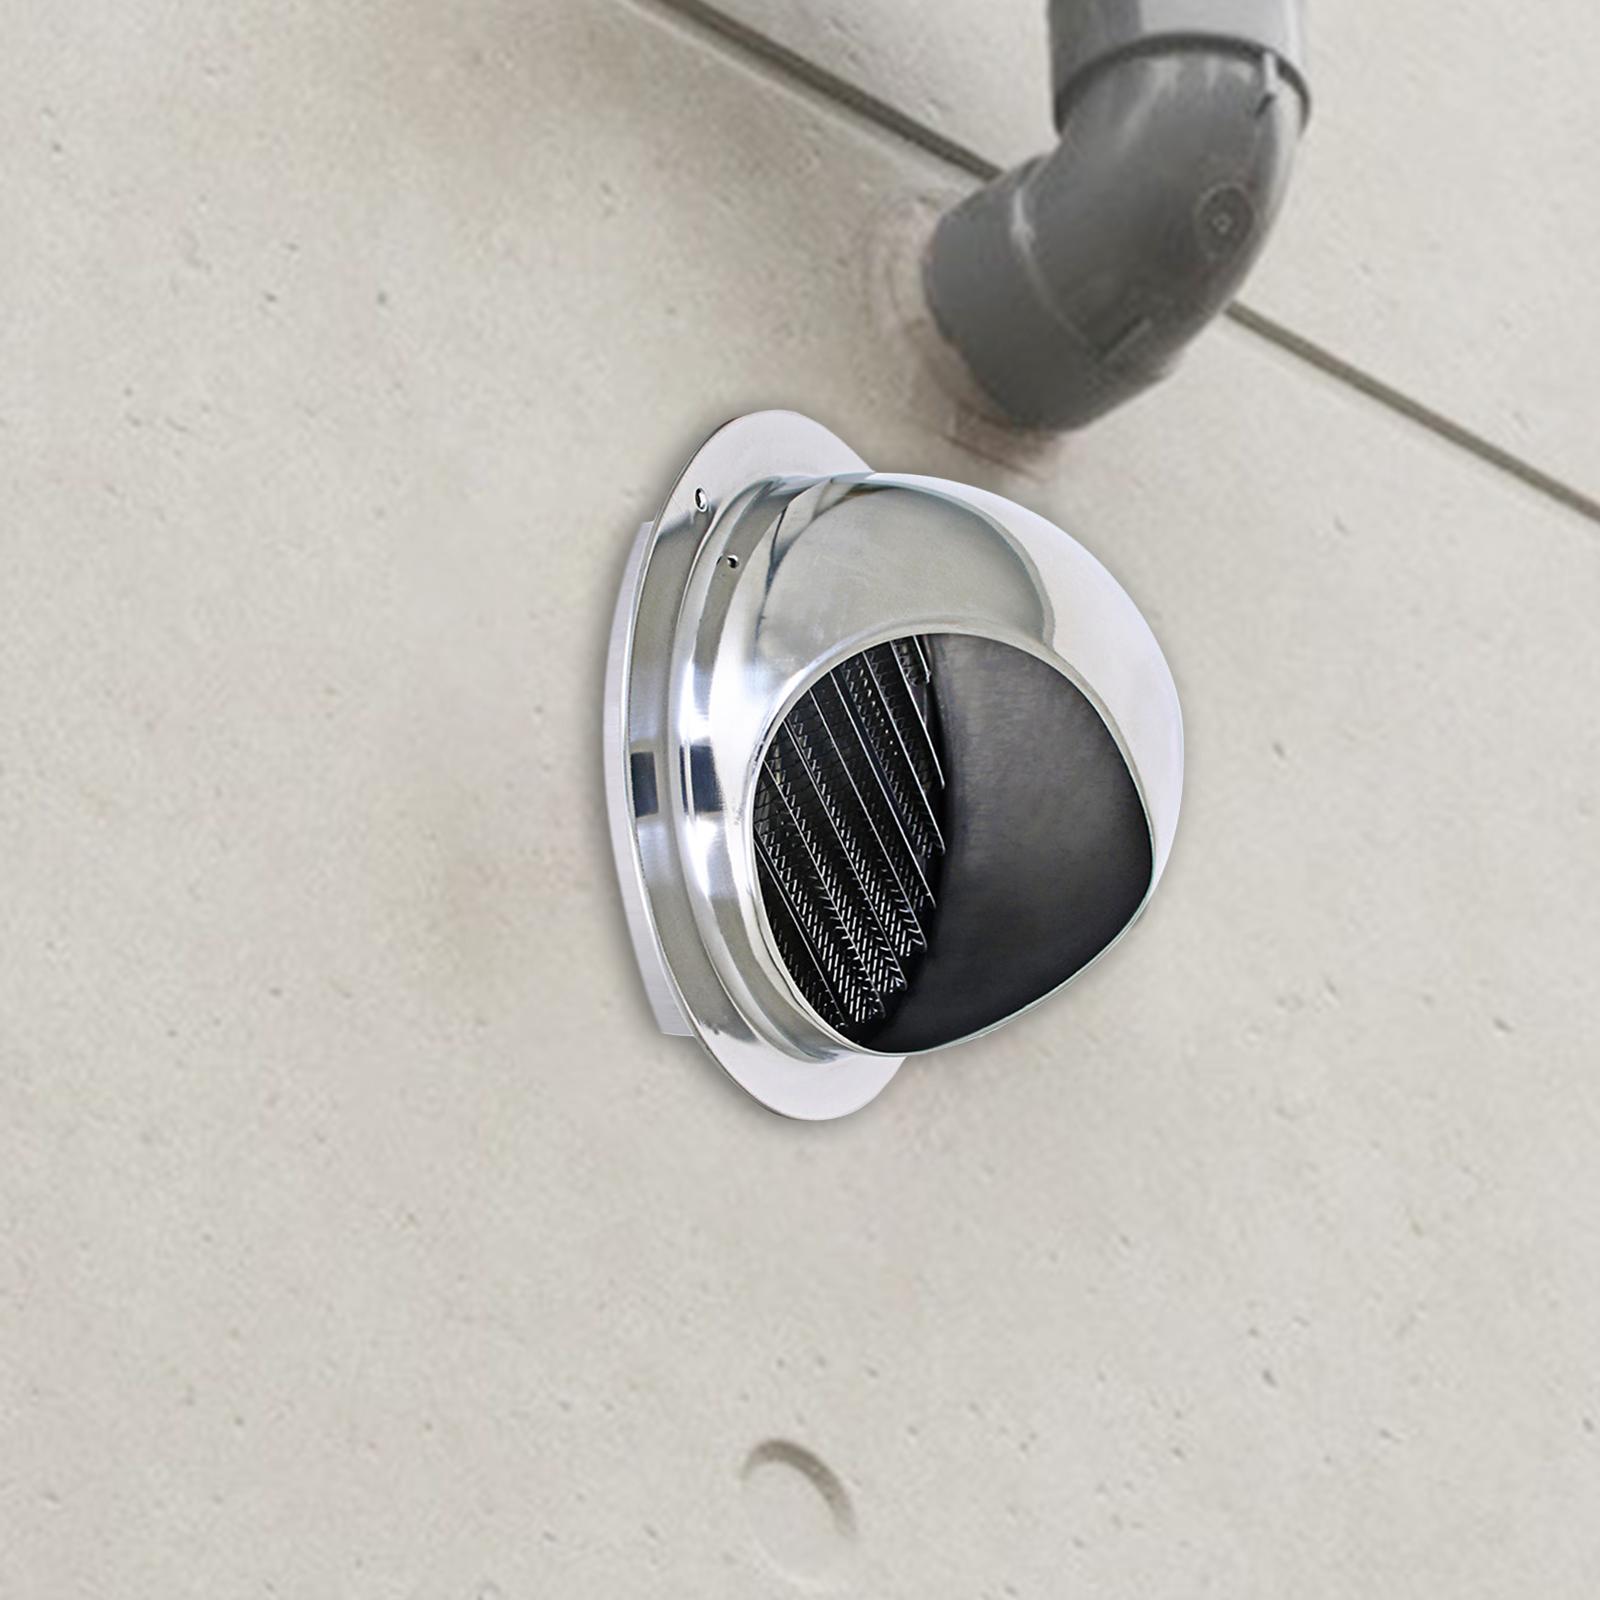 304 Stainless Steel Air Vent Outlet Caps with Built in Mesh Screen Vent Hood 100mm